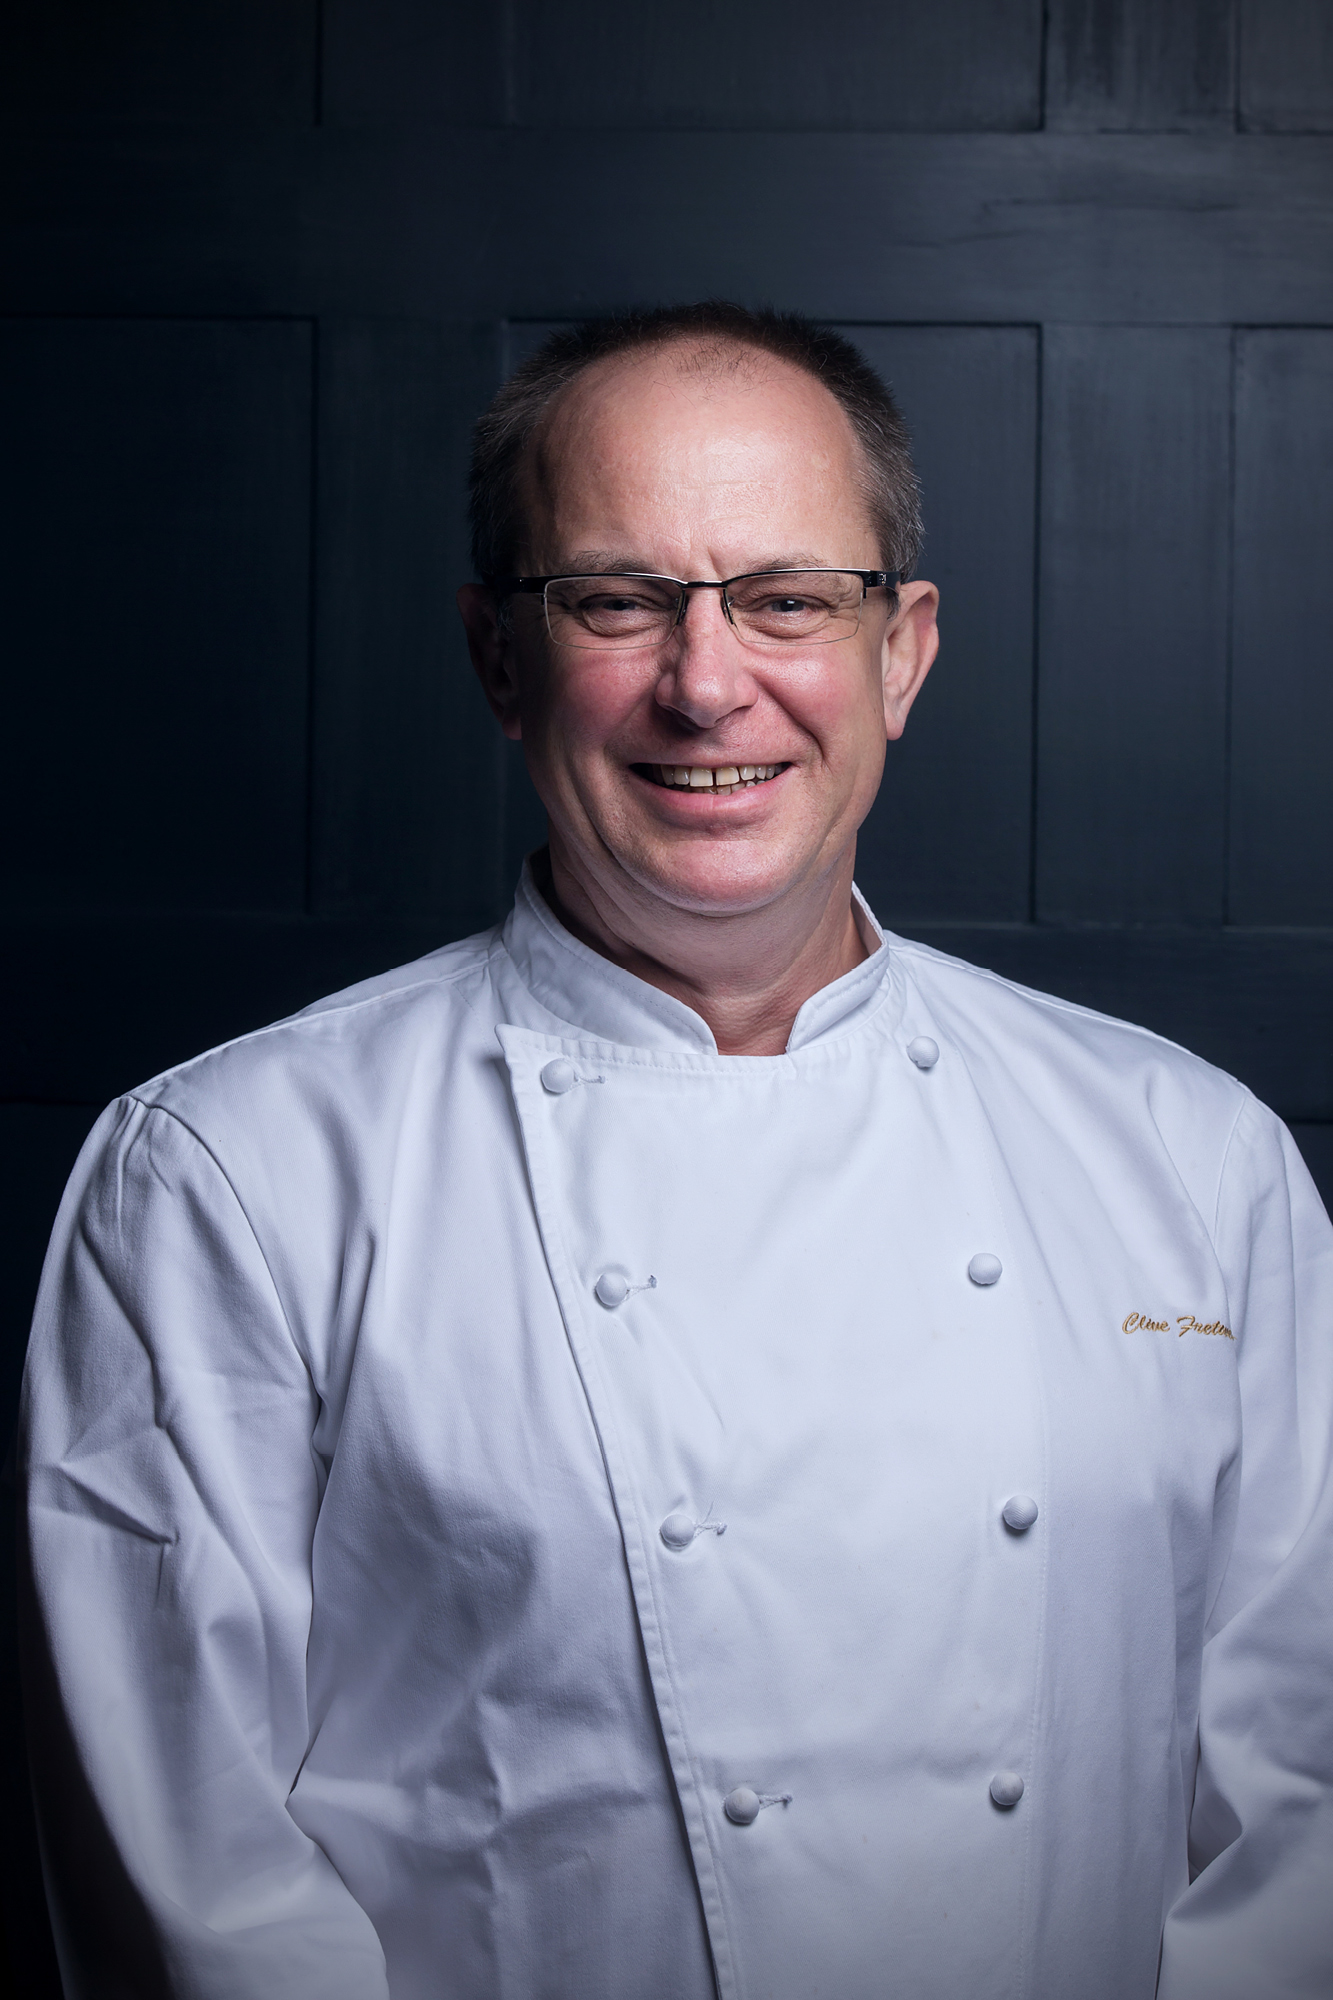 Clive Fretwell of Brasserie Blanc